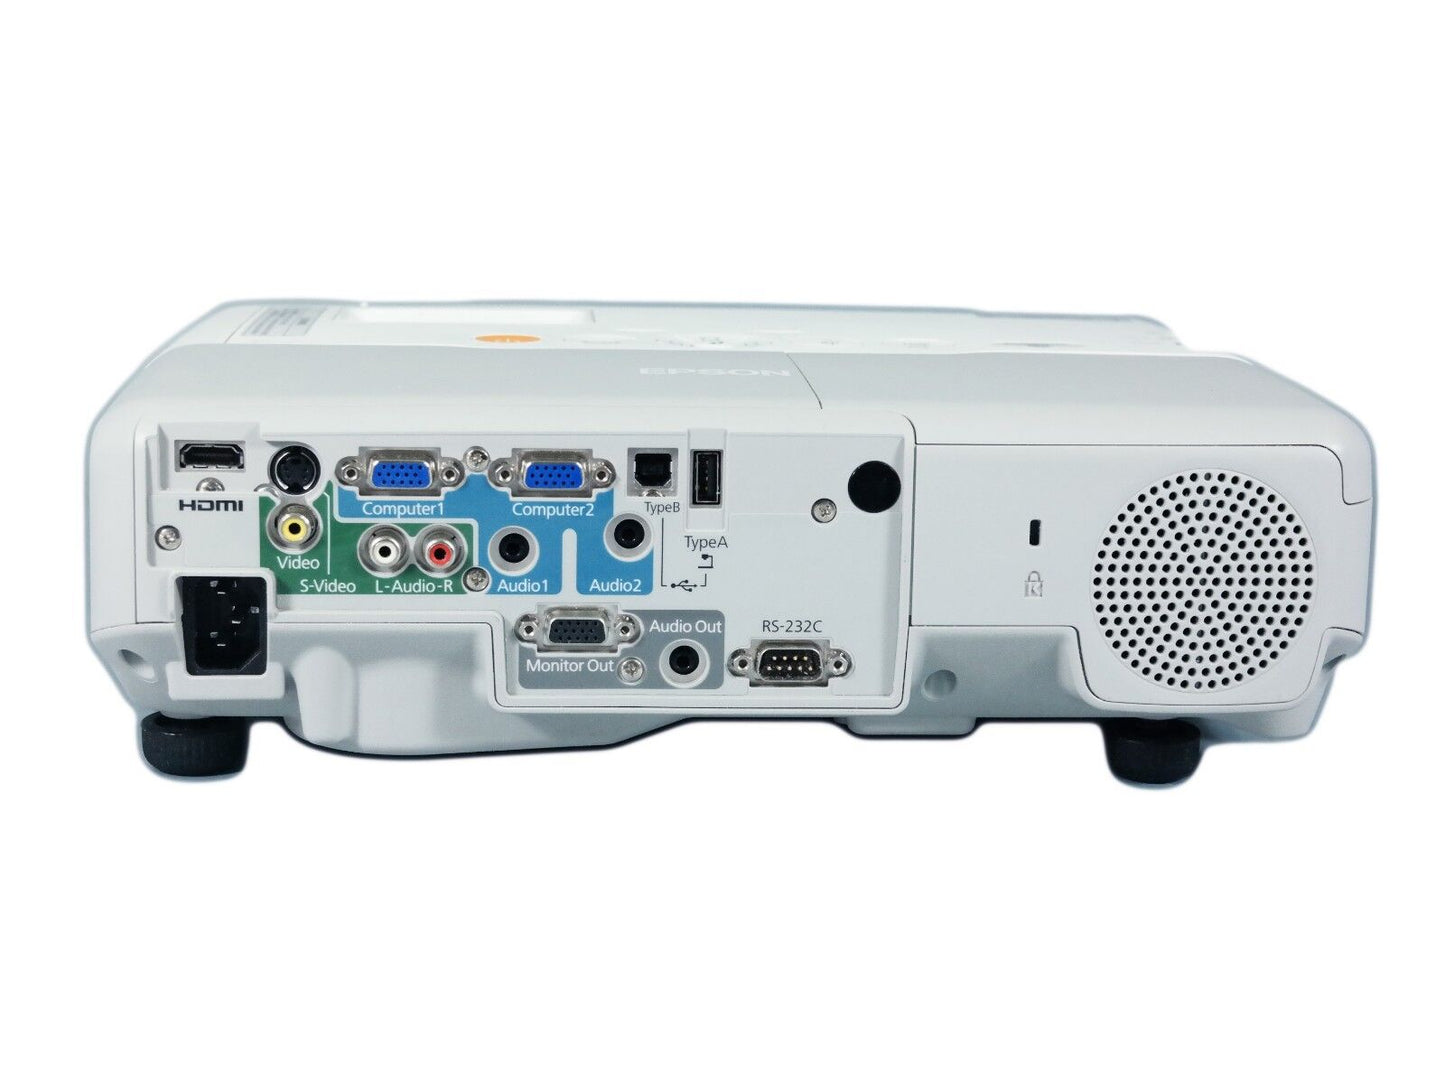 Epson PowerLite 92 Projector for Meetings w/Remote